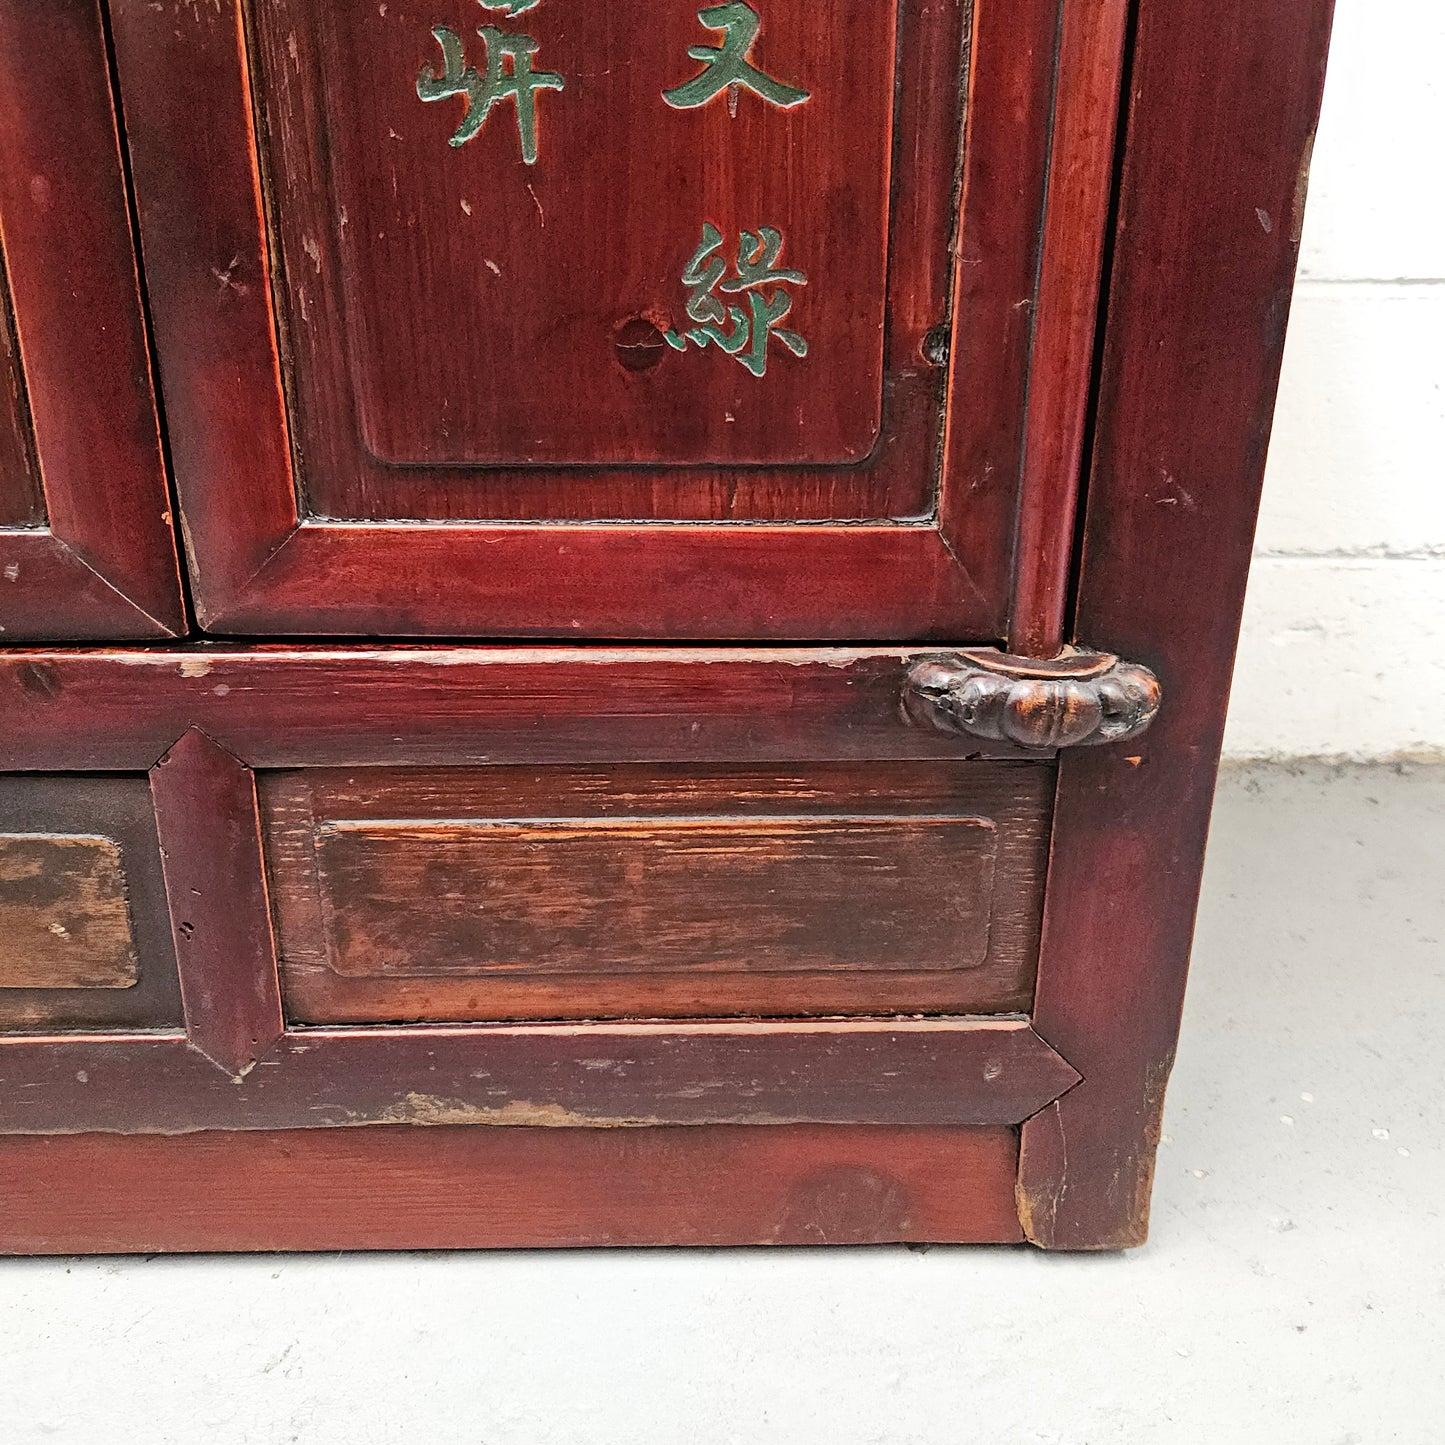 Vintage Chinese Two Door Cabinet